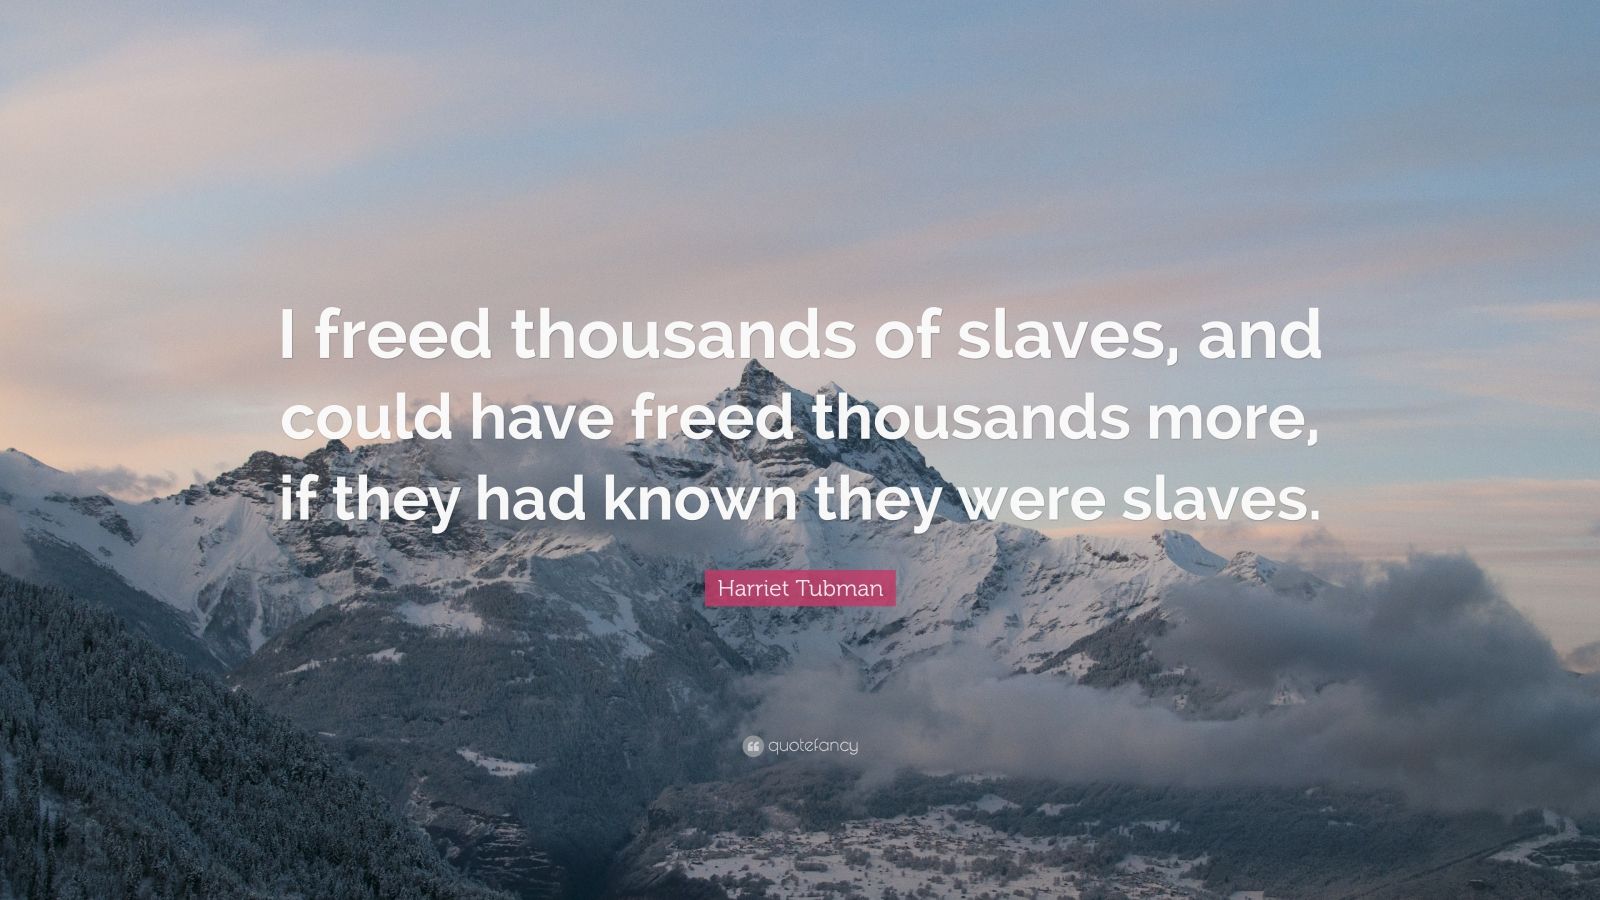 Harriet Tubman Quote: “I freed thousands of slaves, and could have ...